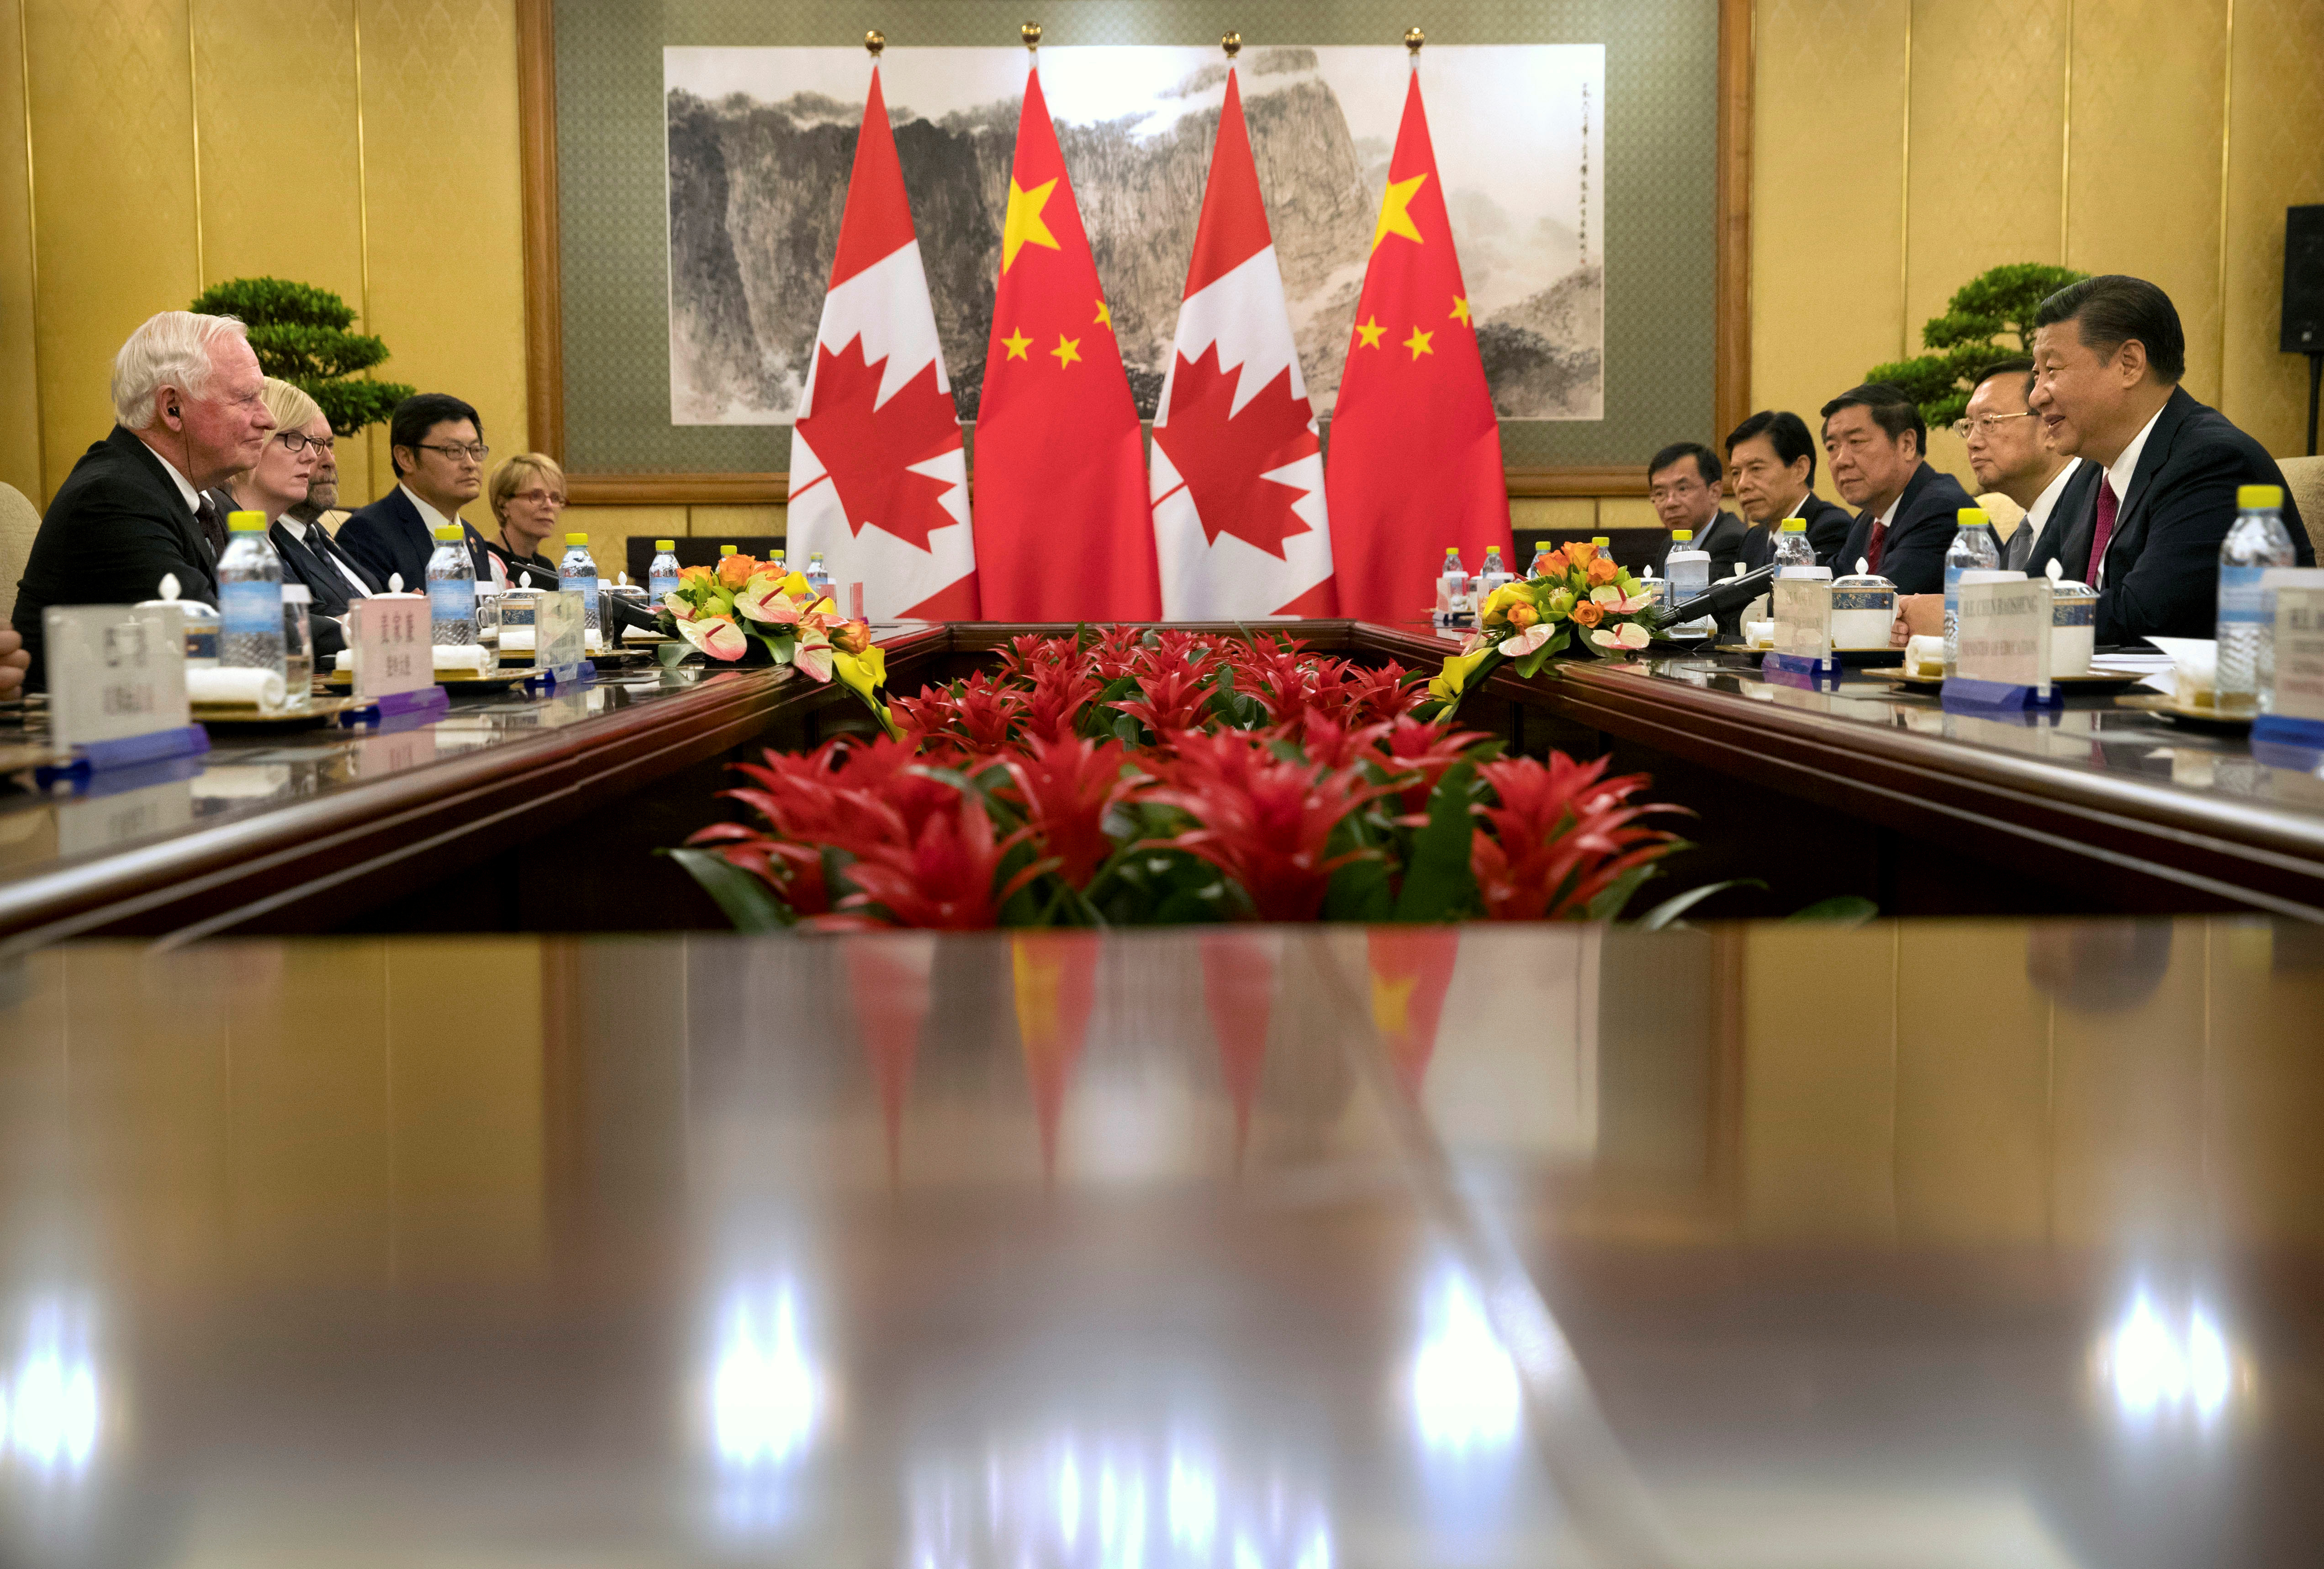 Governor General of Canada David Johnston, meets with Chinese President Xi Jinping, at the Diaoyutai State Guesthouse in Beijing